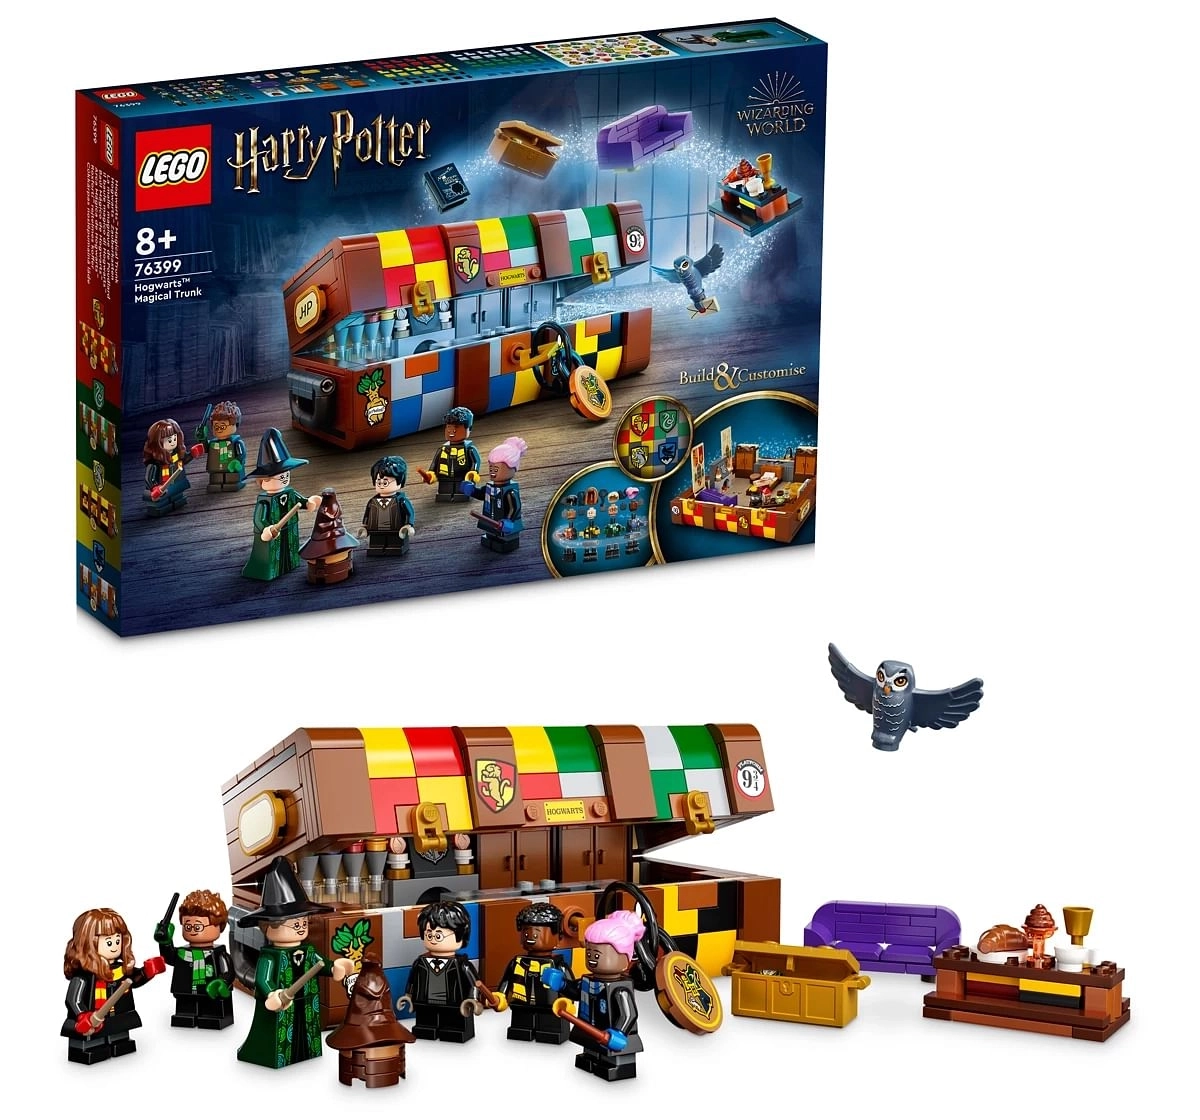 Lego Harry Potter Hogwarts Magical Trunk Building Kit Featuring Popular Character Minifigures from The Harry Potter Movies, Great Gift for Kids Aged 8+ (603 Pieces)